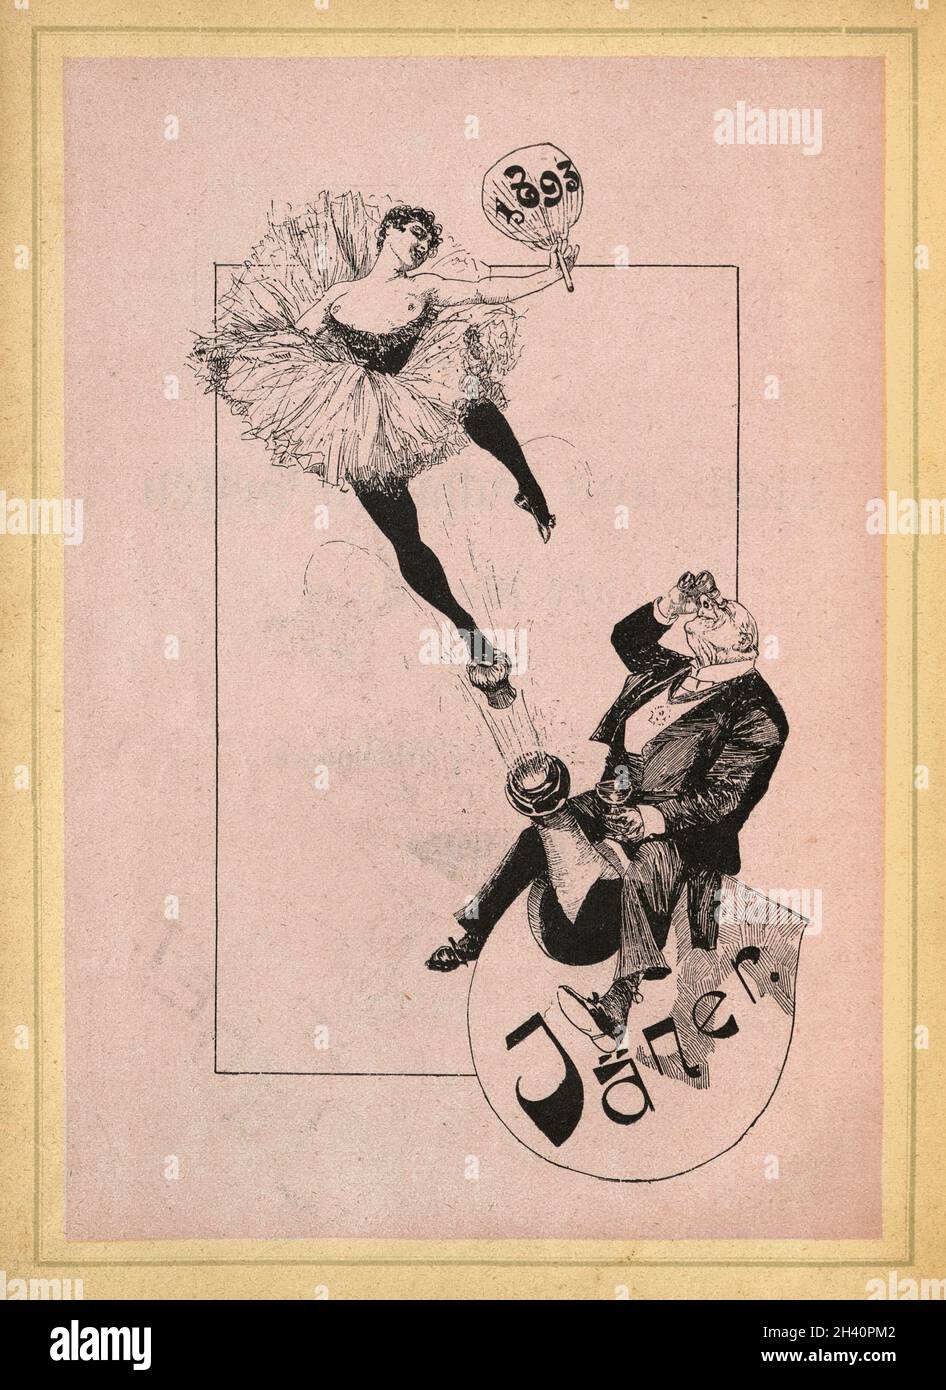 Showgirl exploding from champagne bottle, New Years celebrations, 1893, Victorian caricature Stock Photo